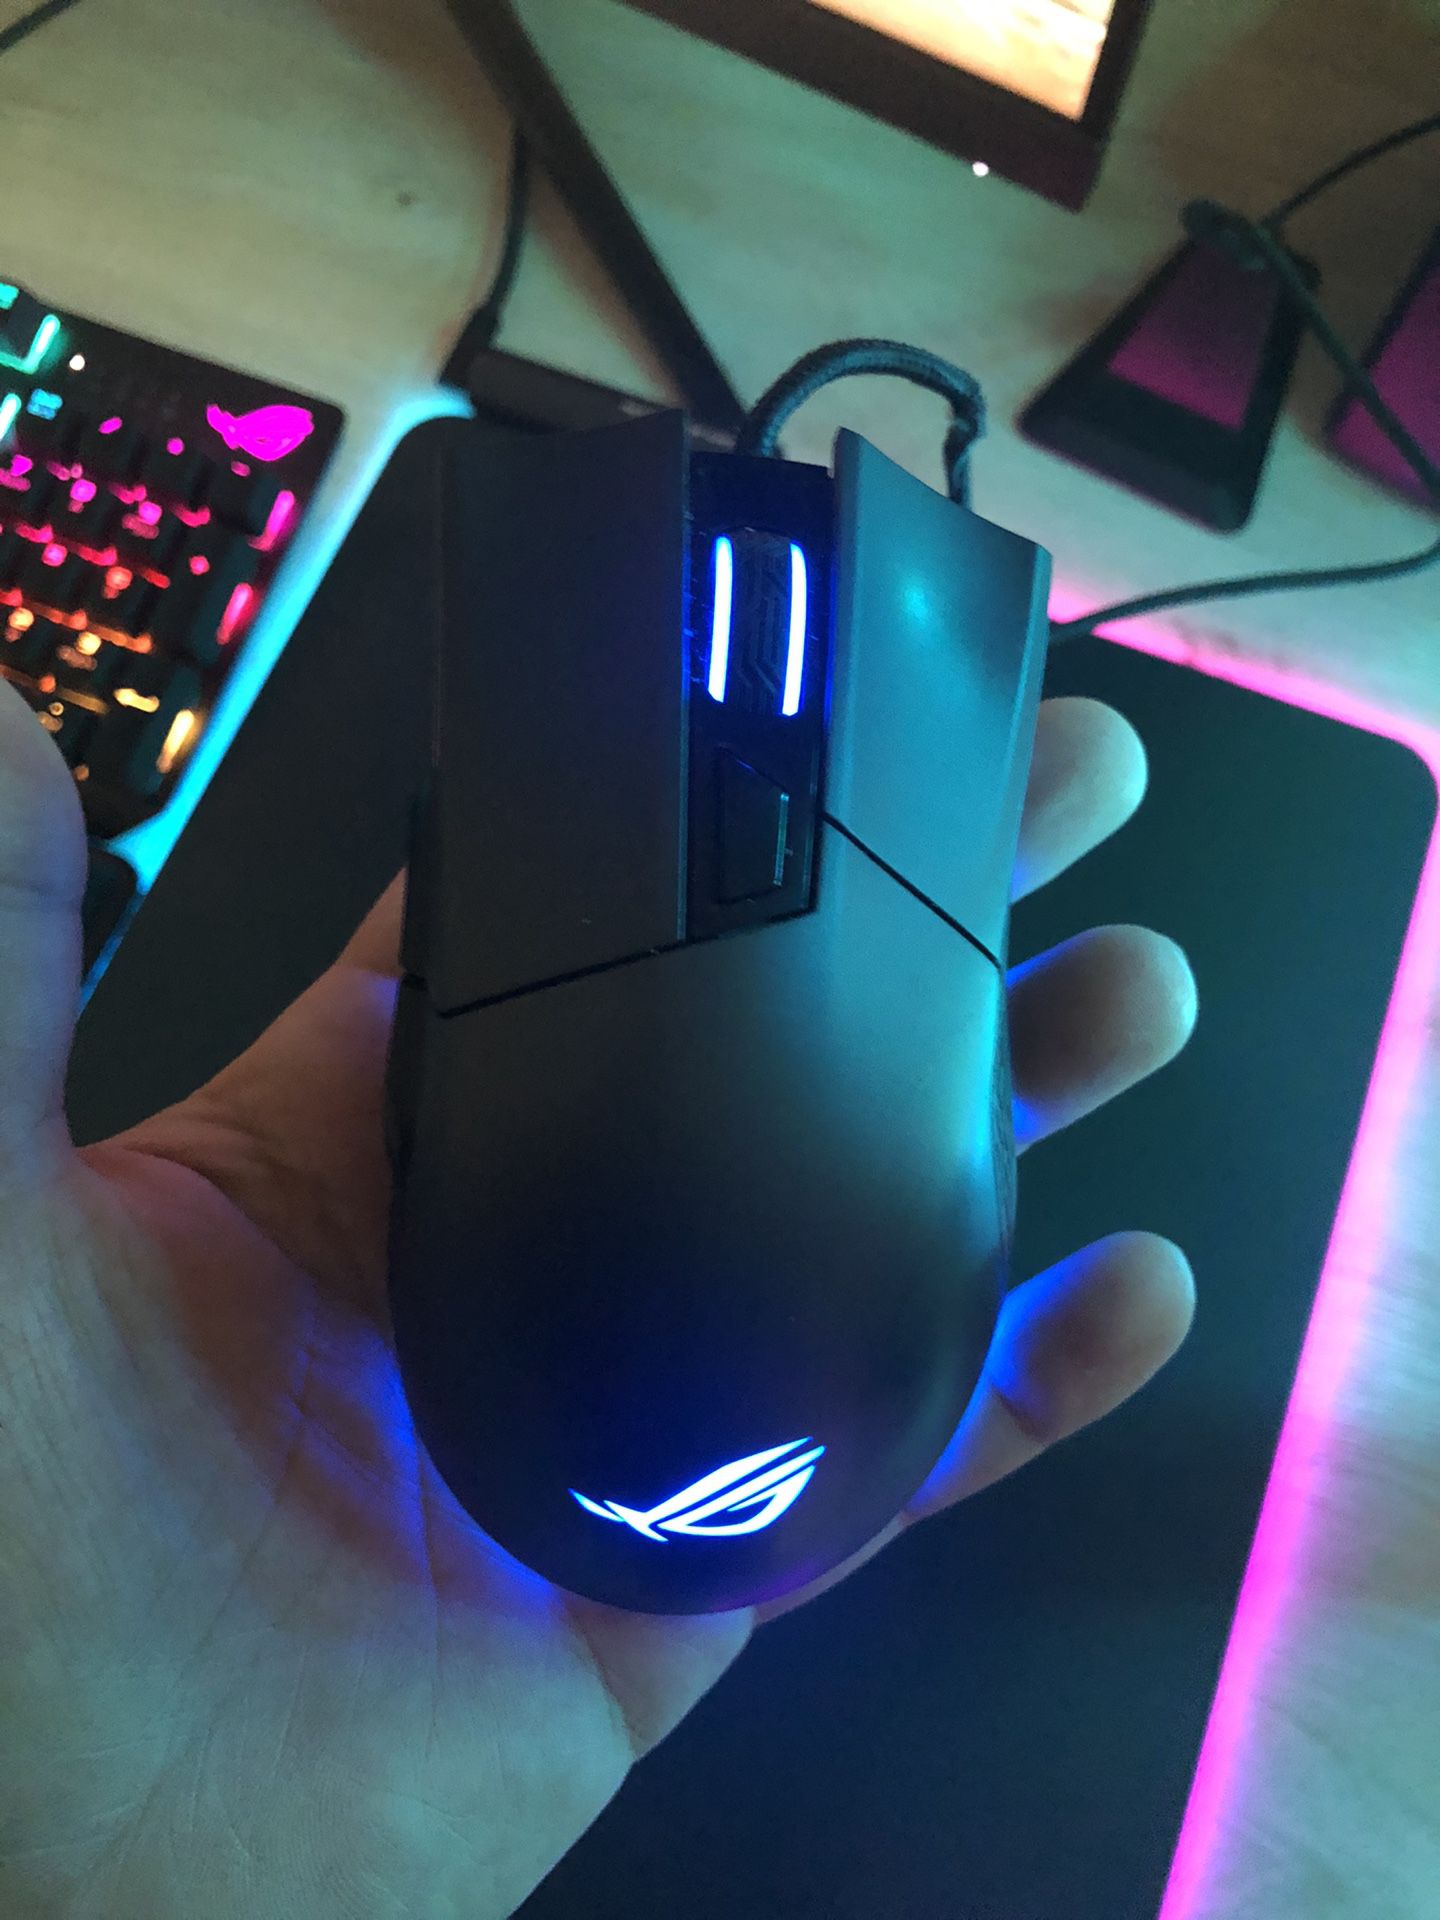 Asus Origin 2 Gaming mouse and cord bungie.